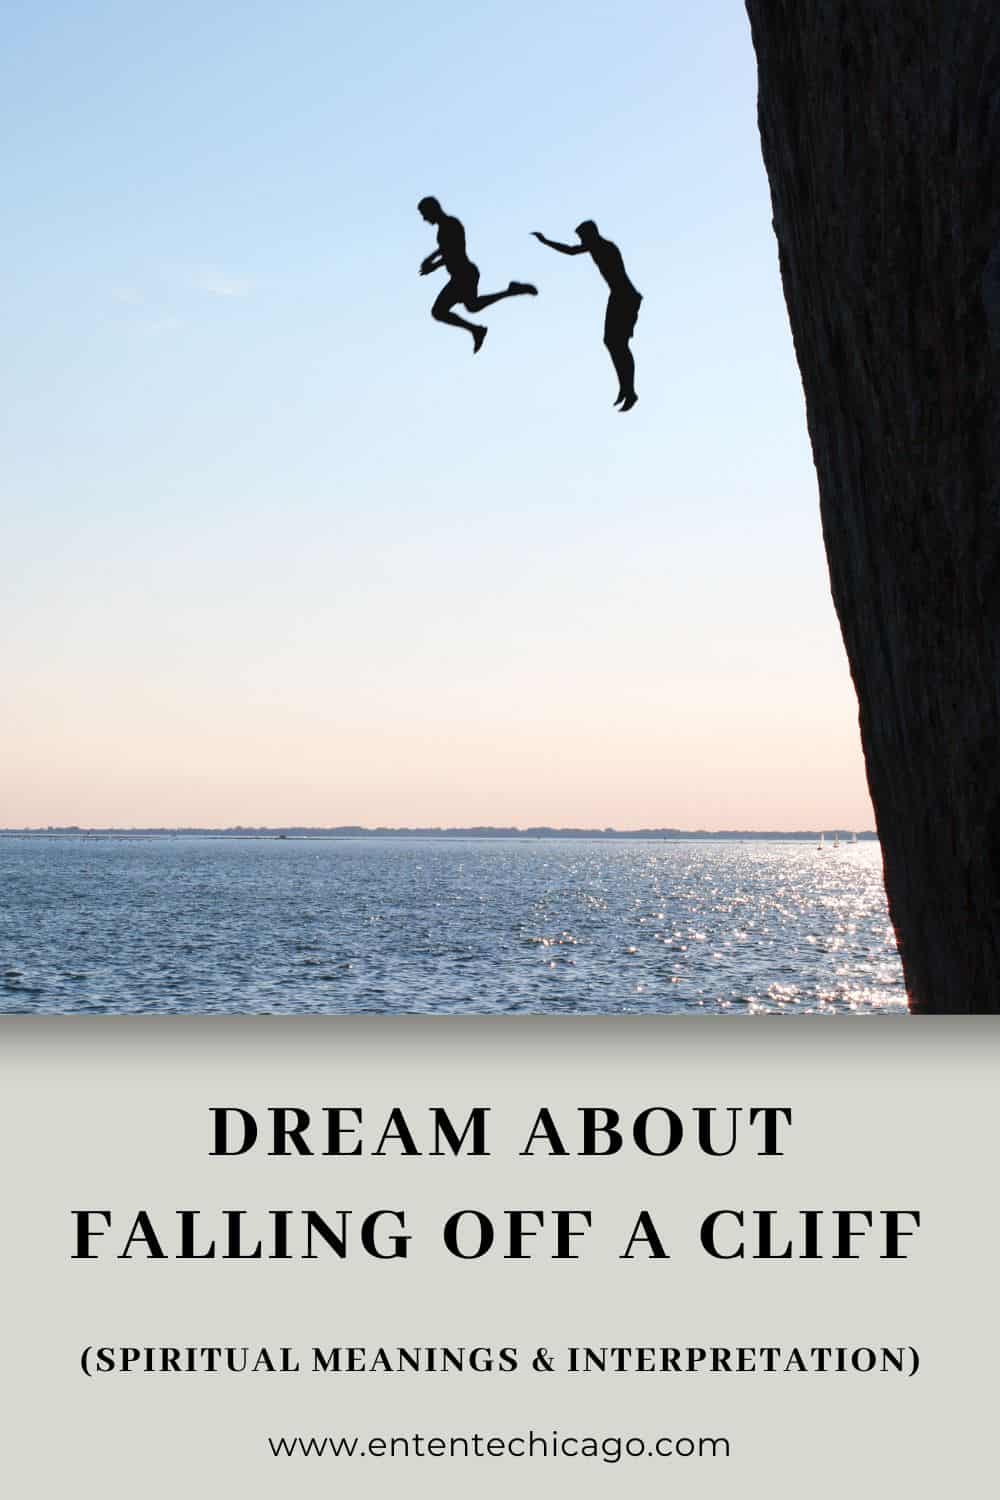 Dream About Falling Off A Cliff (Spiritual Meanings & Interpretation)